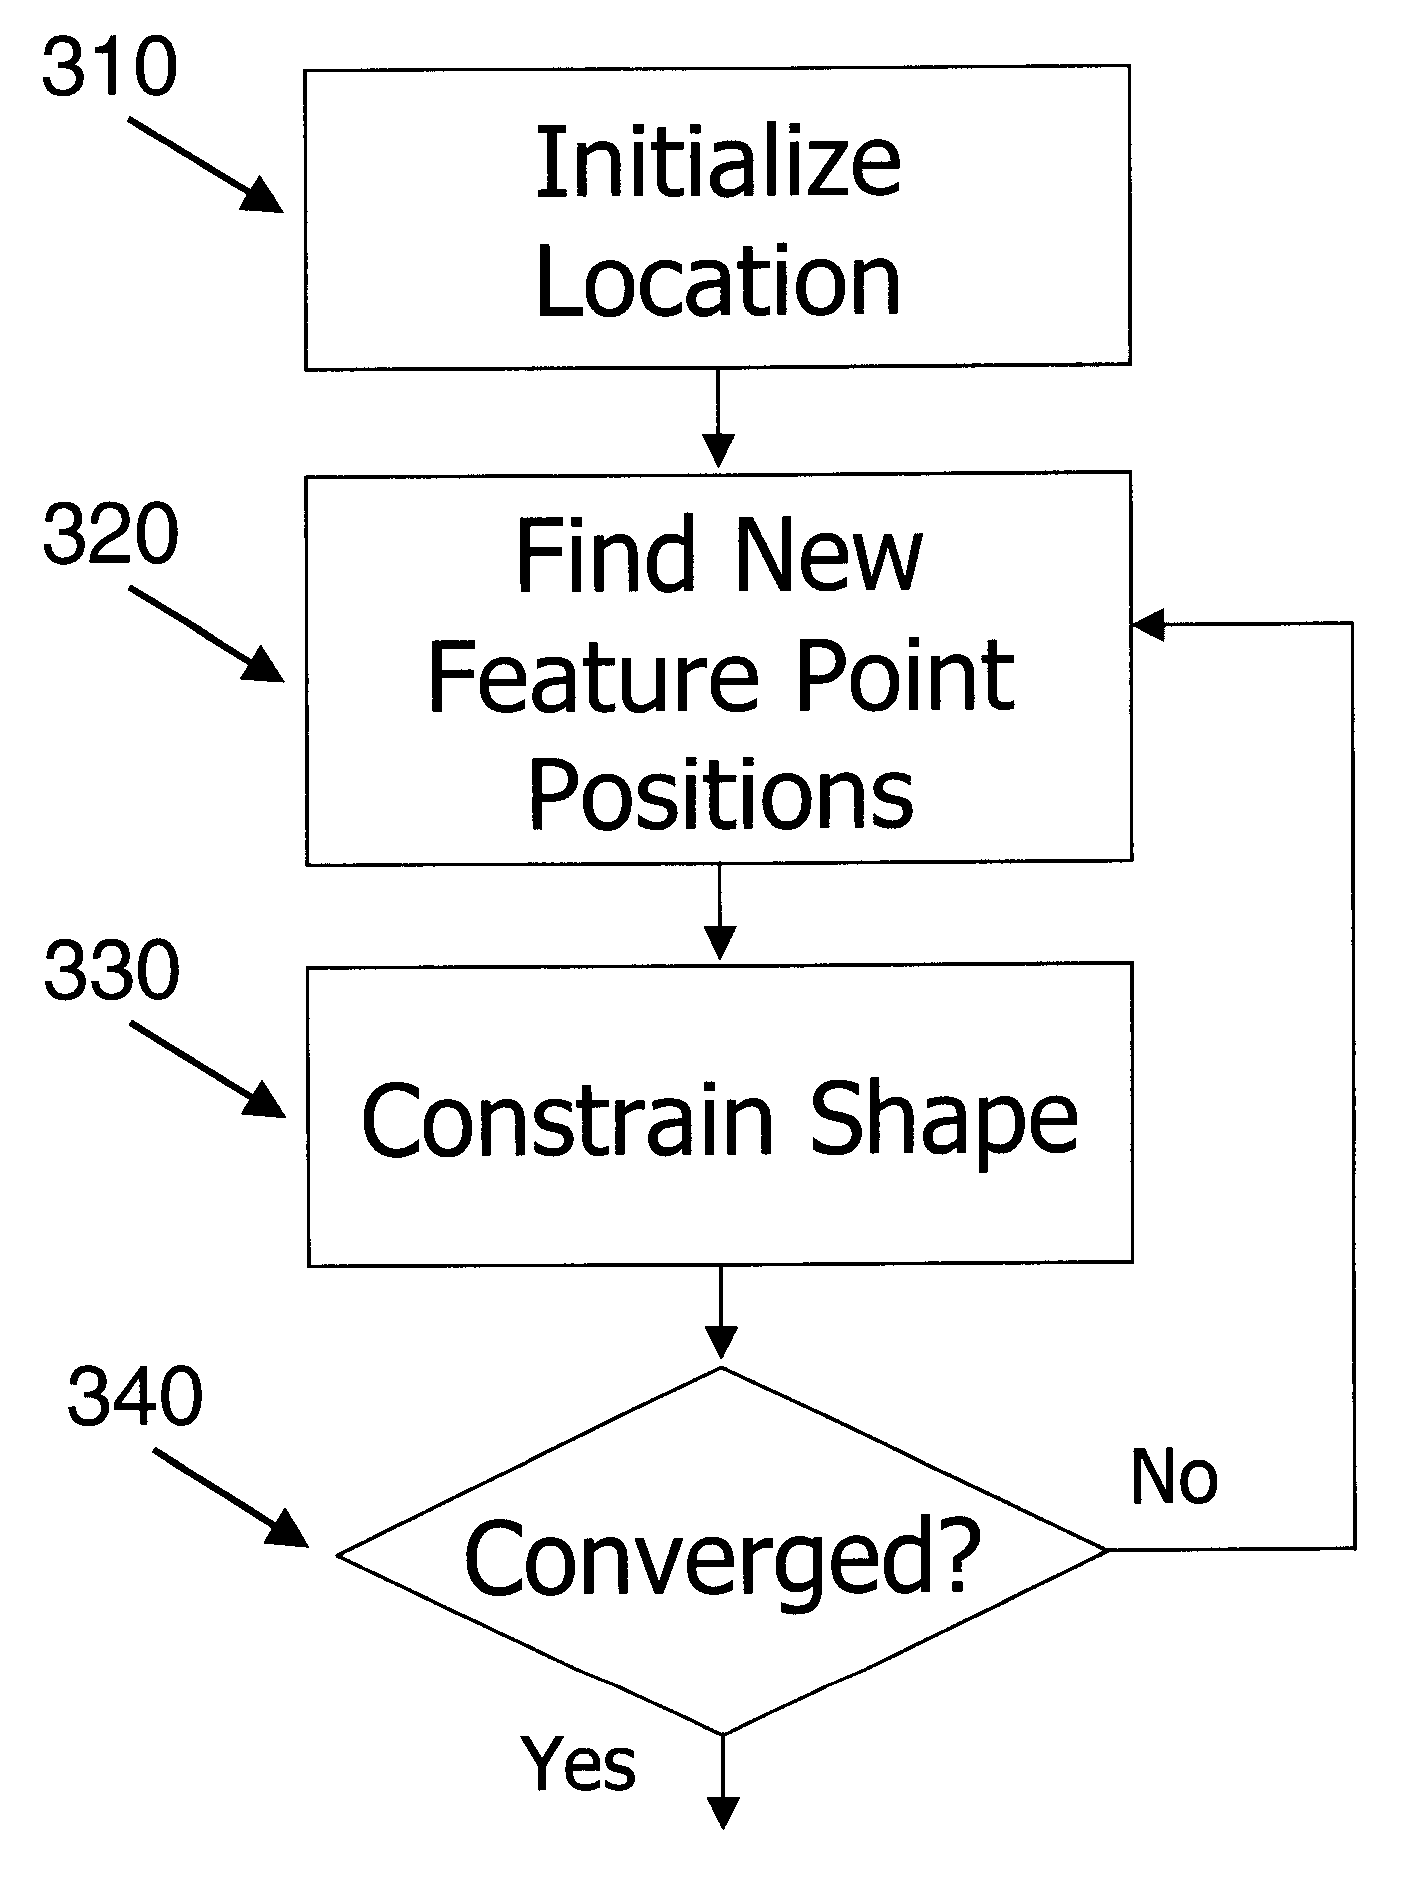 Shape detection using coherent appearance modeling